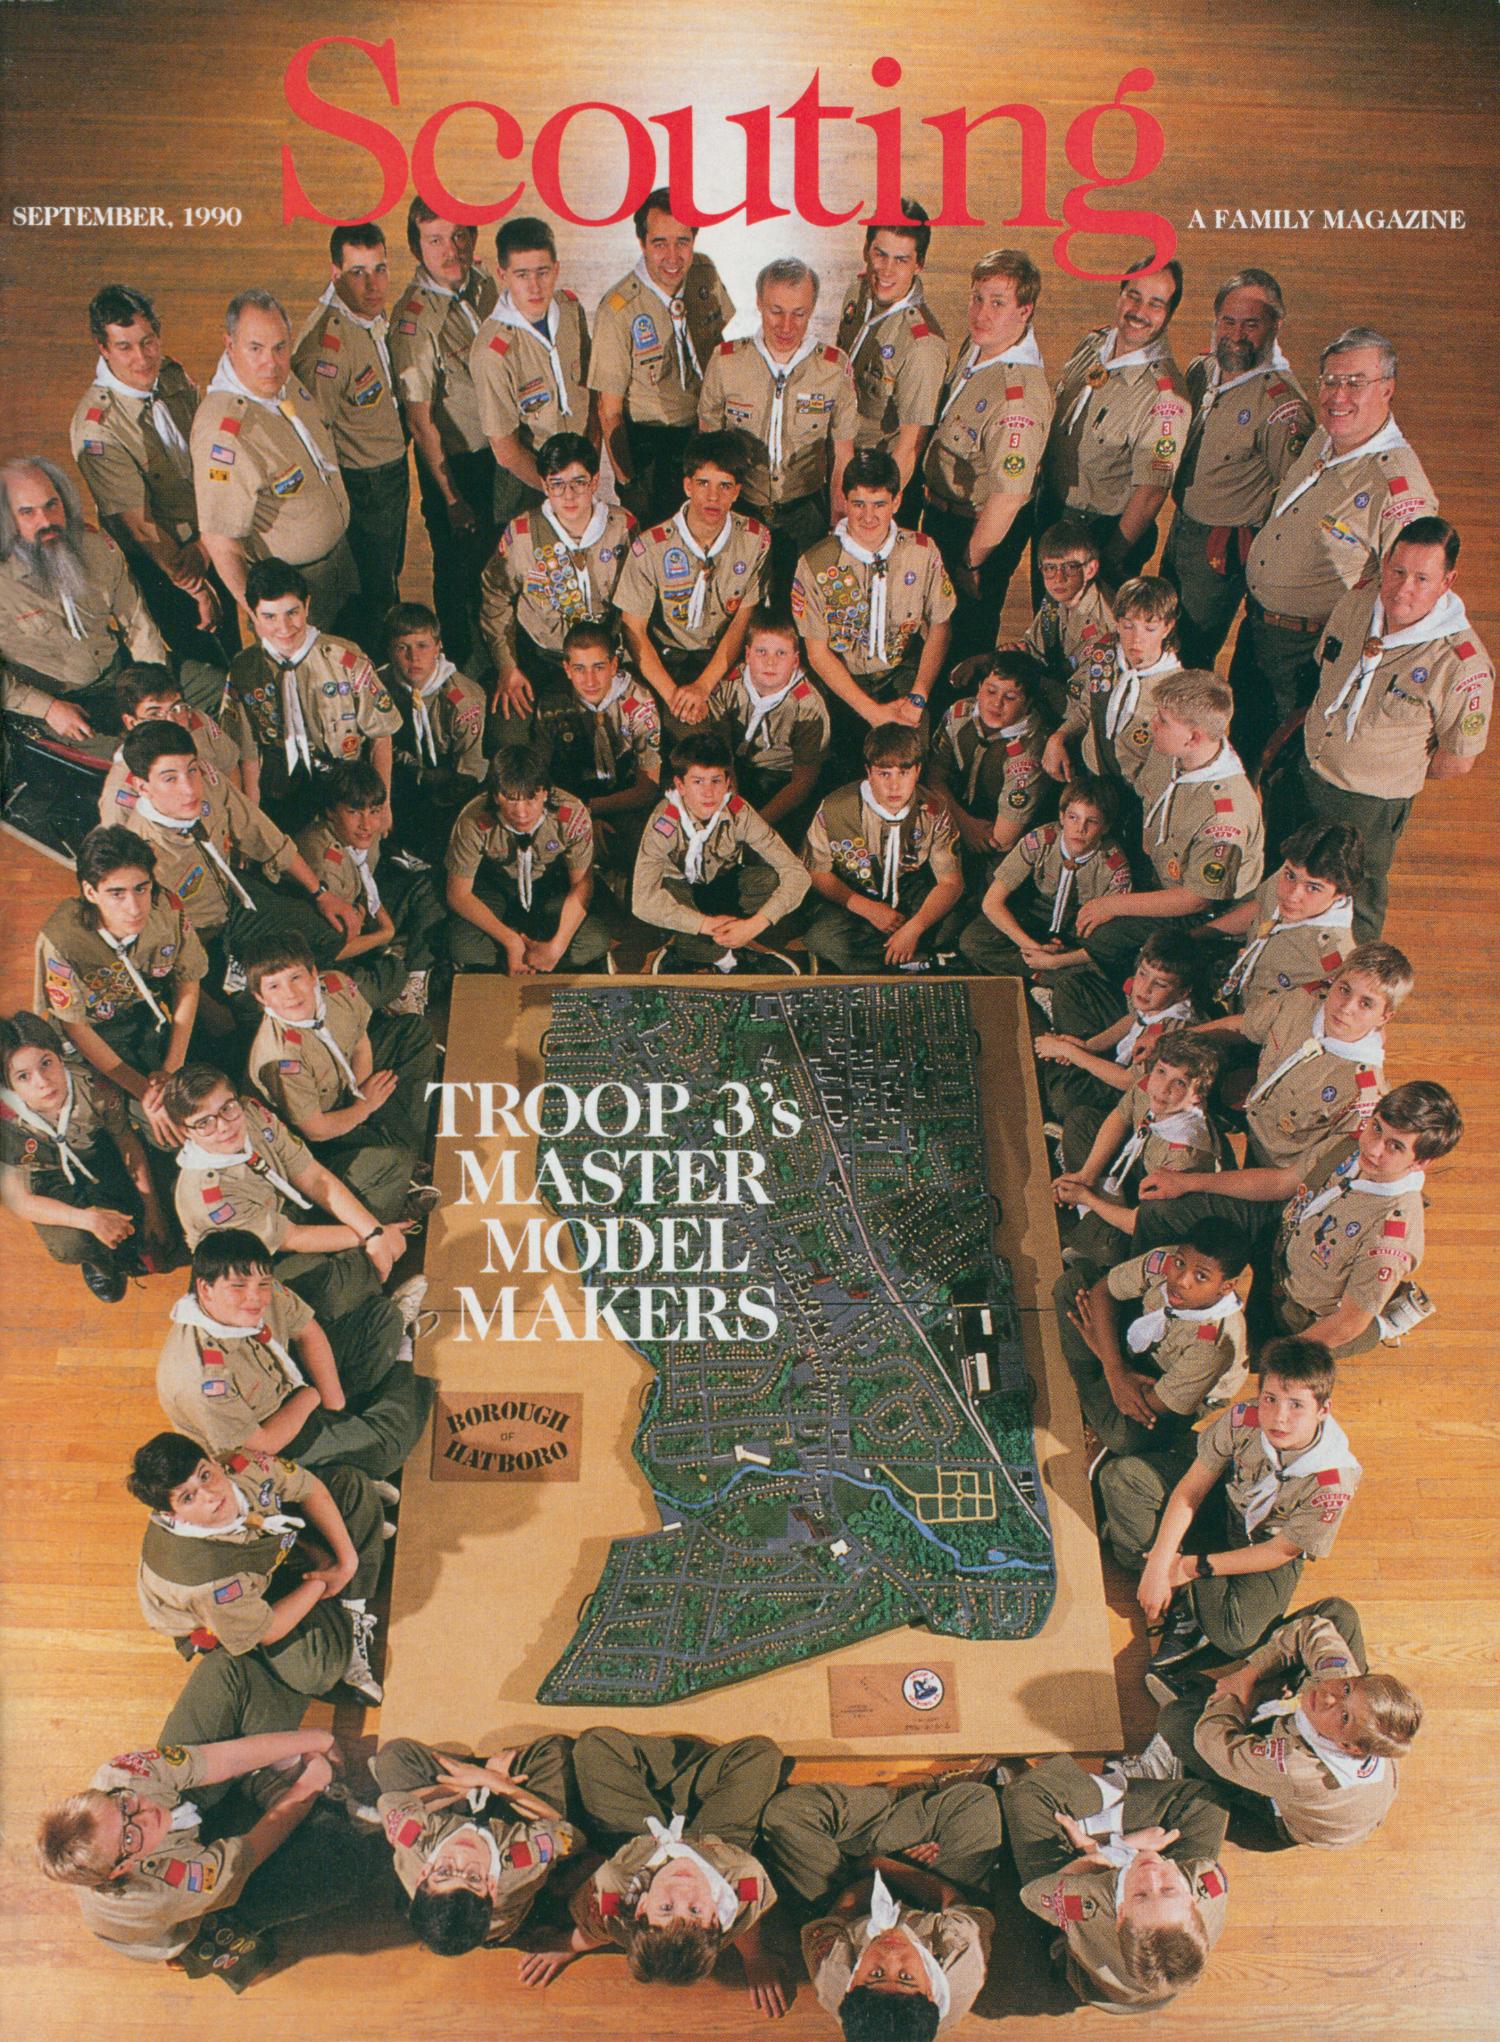 Scouting, Volume 78, Number 4, September 1990
                                                
                                                    Front Cover
                                                